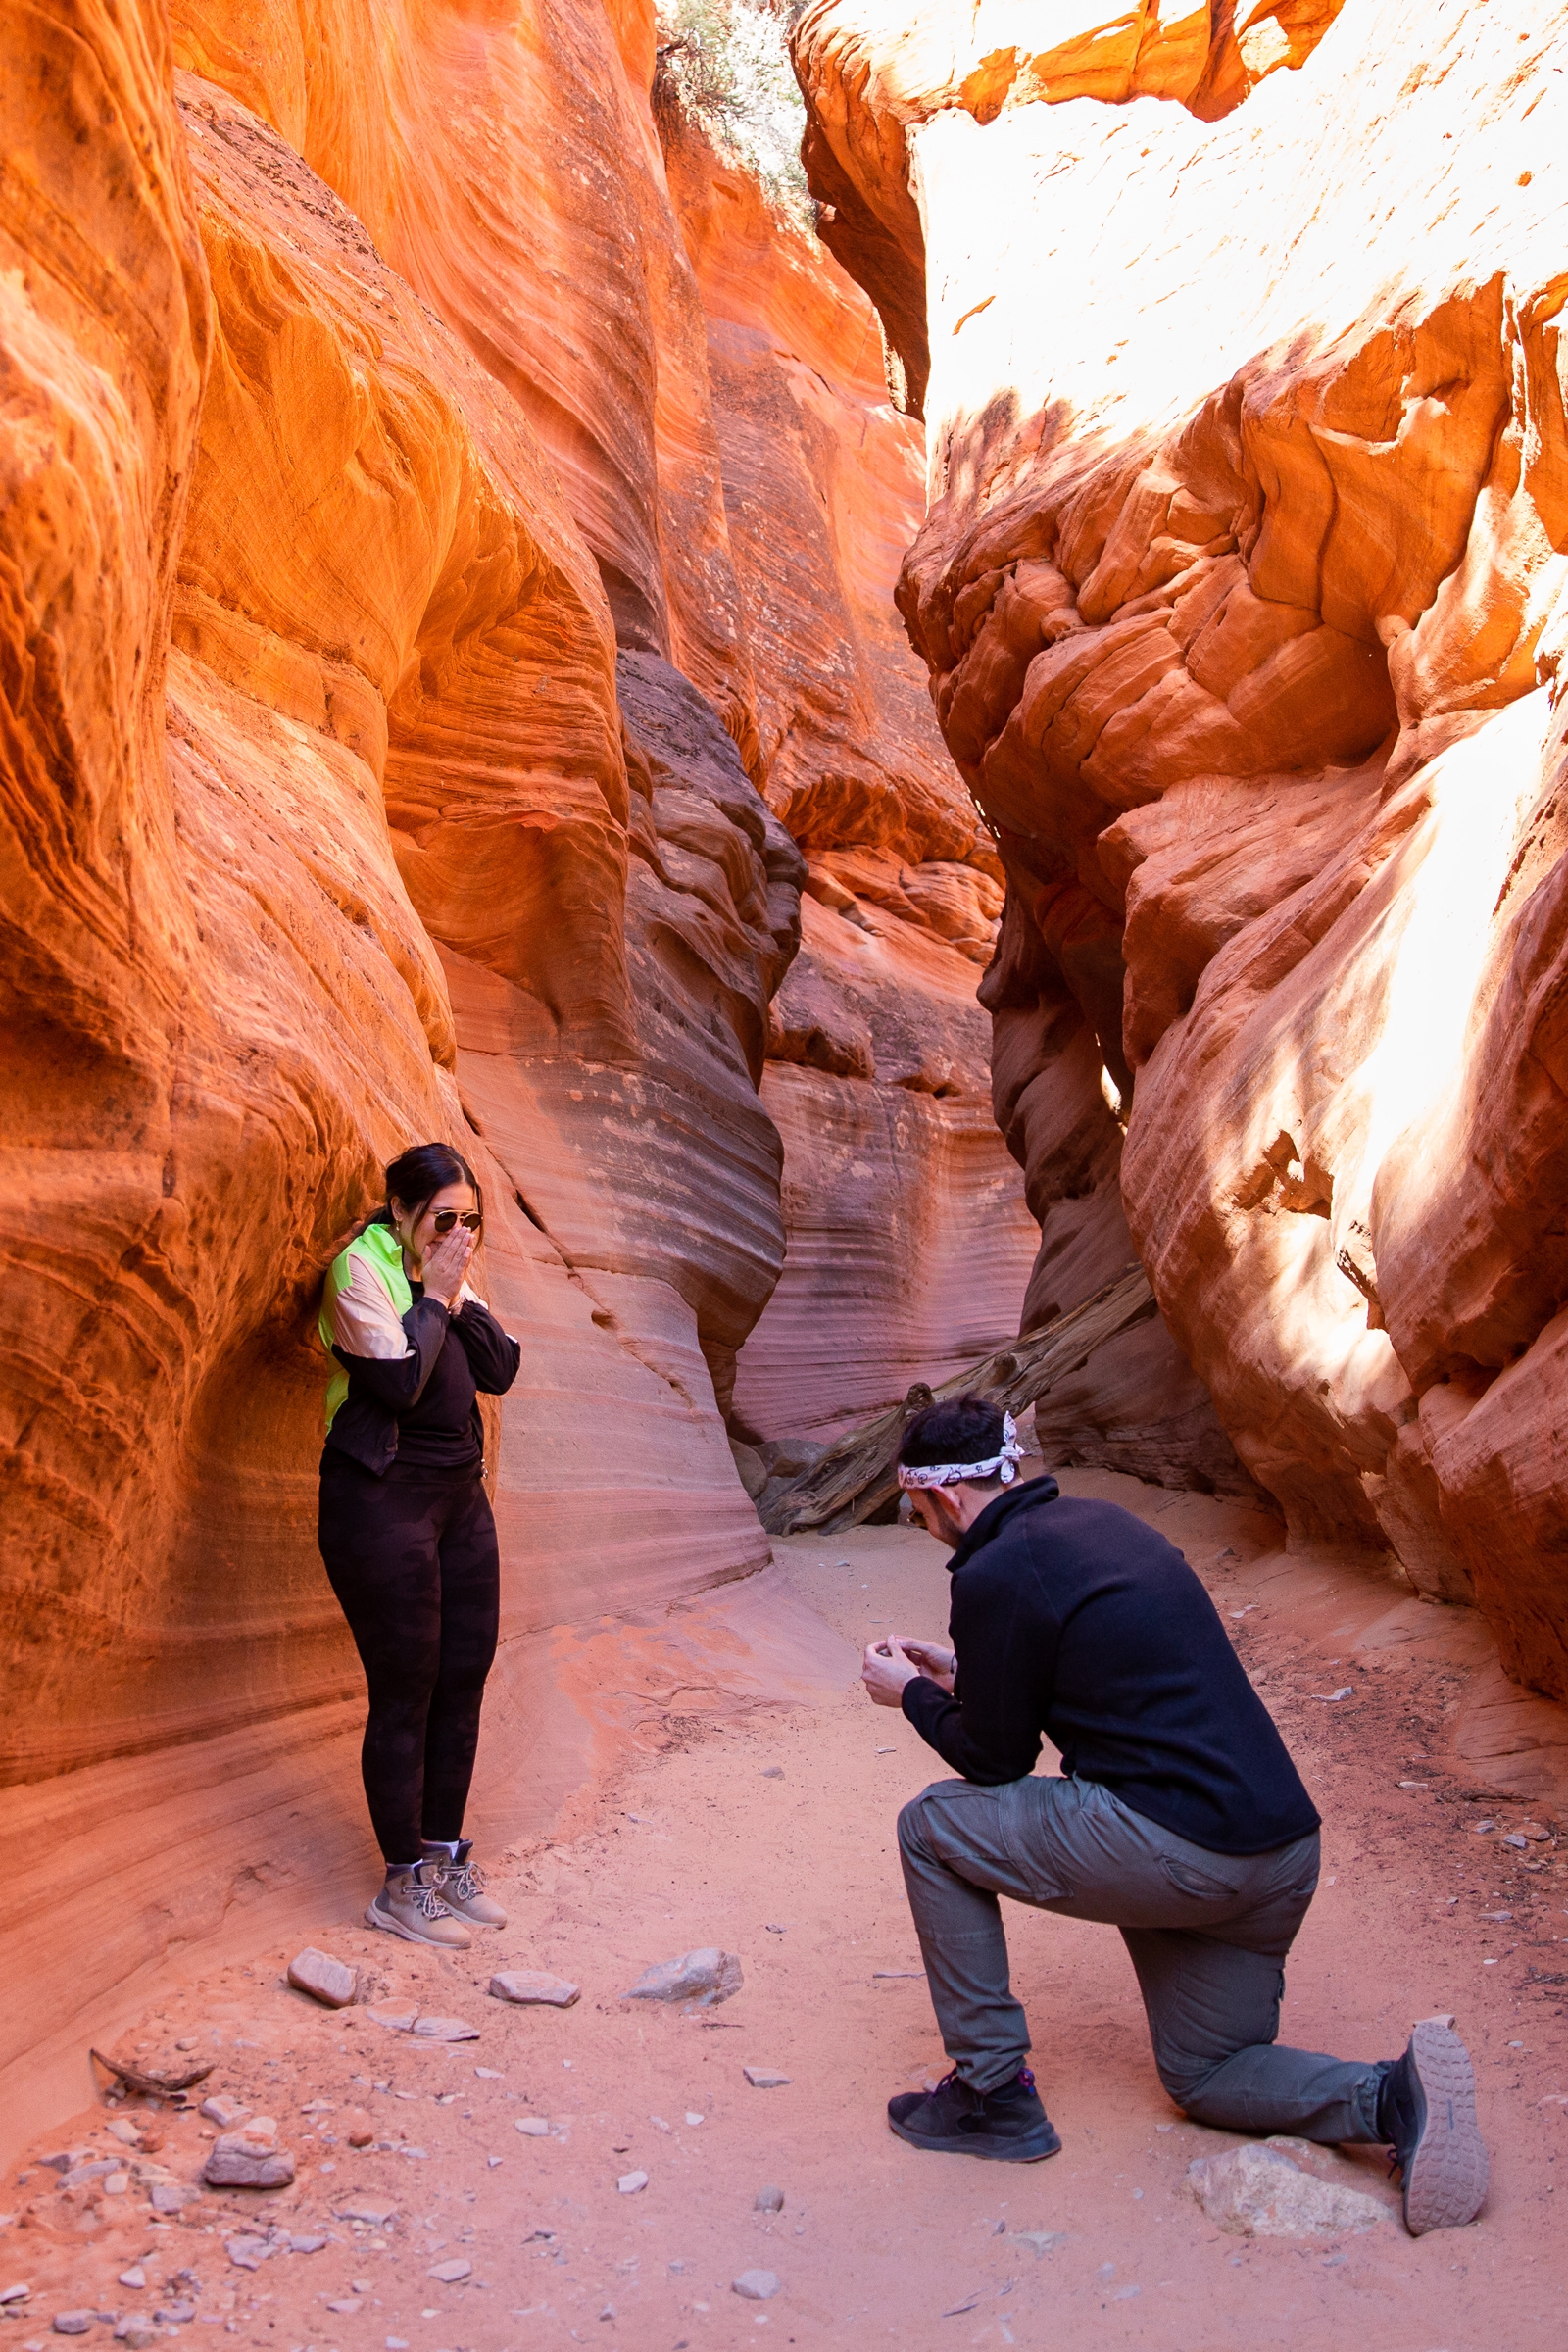 A guy down on his knee proposing to his girlfriend in the middle of the Utah slot canyon during their adventurous hike